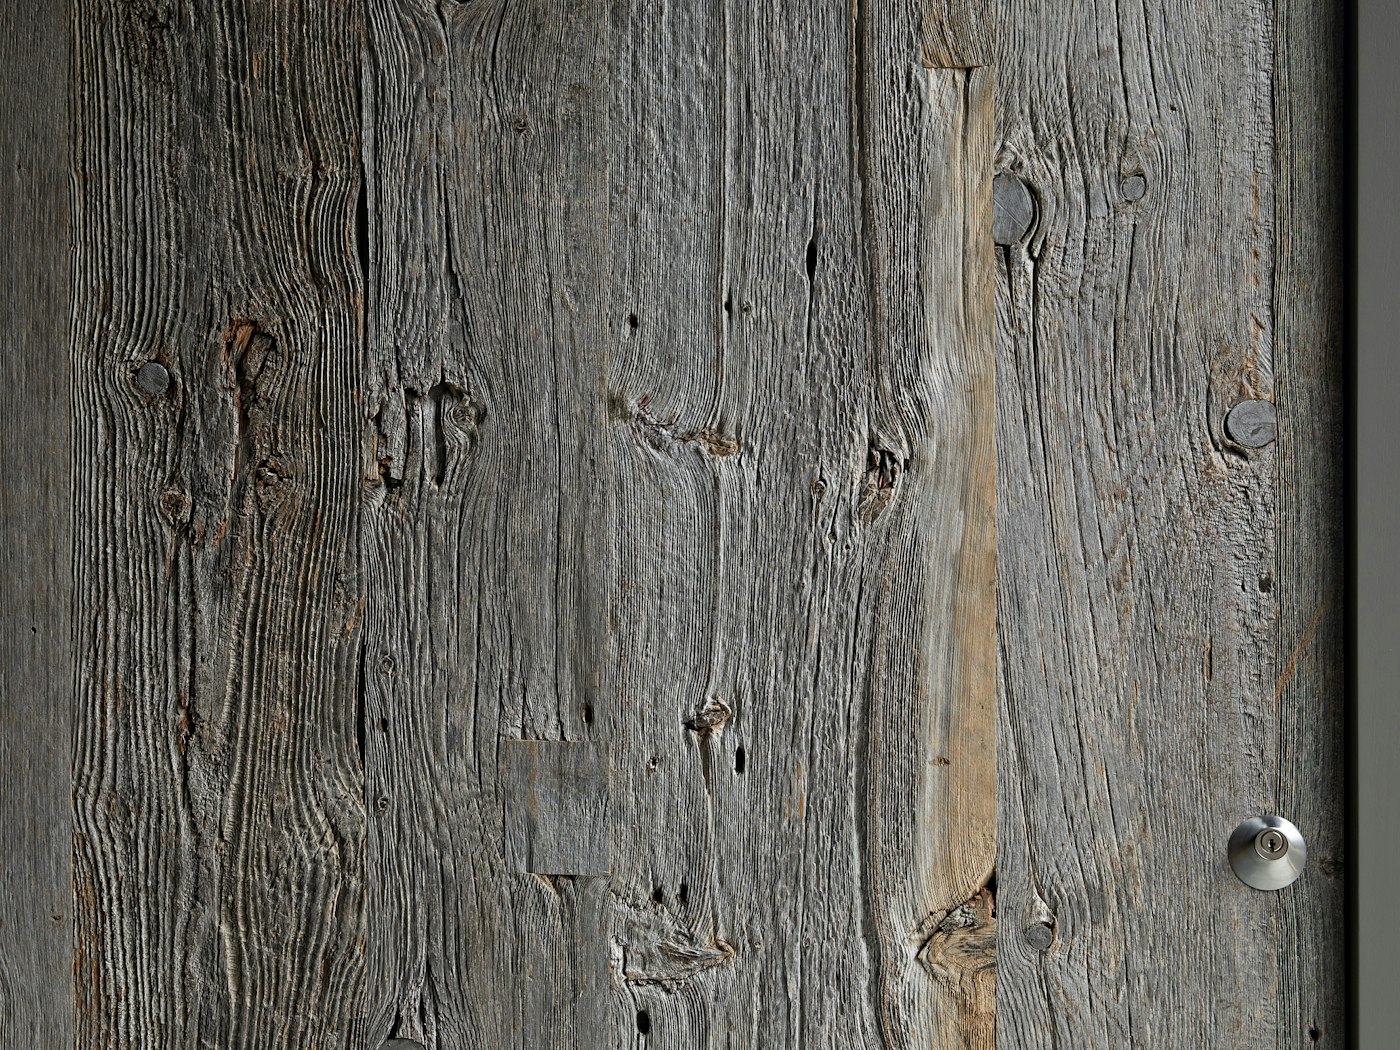 The beauty and history of reclaimed wood can be seen in the grain detail